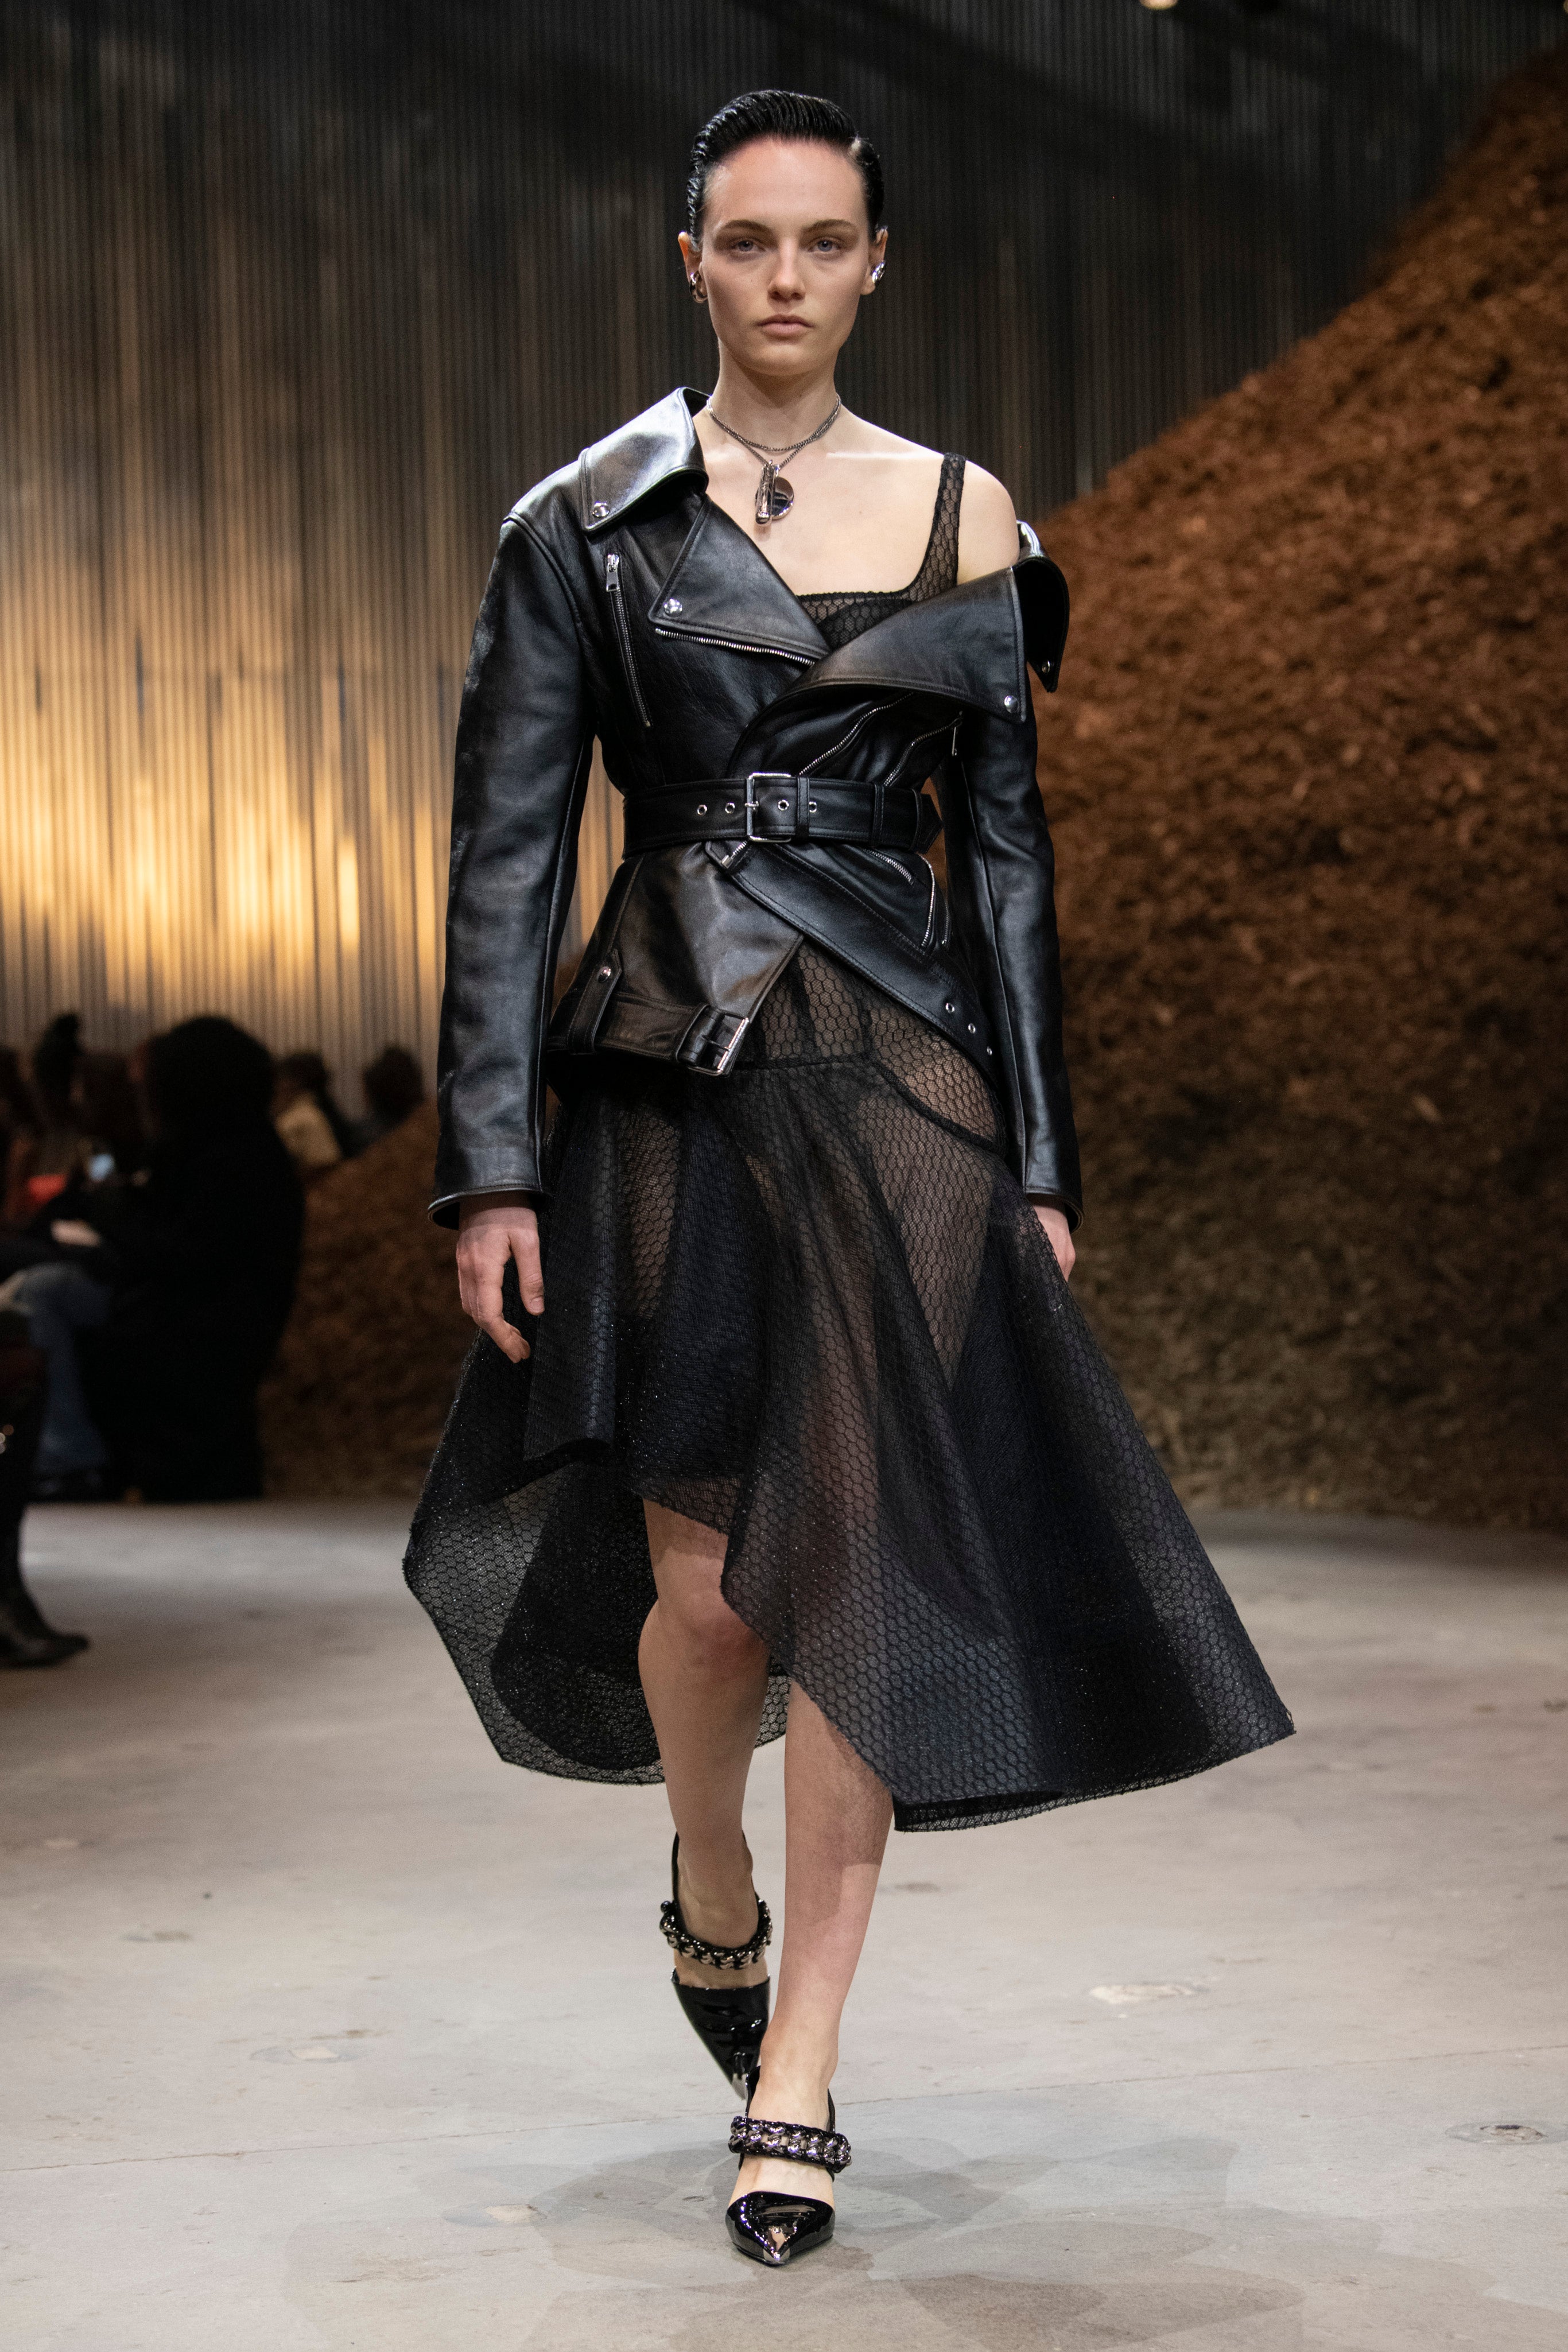 Alexander McQueen's Fall 2022 Show Was An Ode To Nature